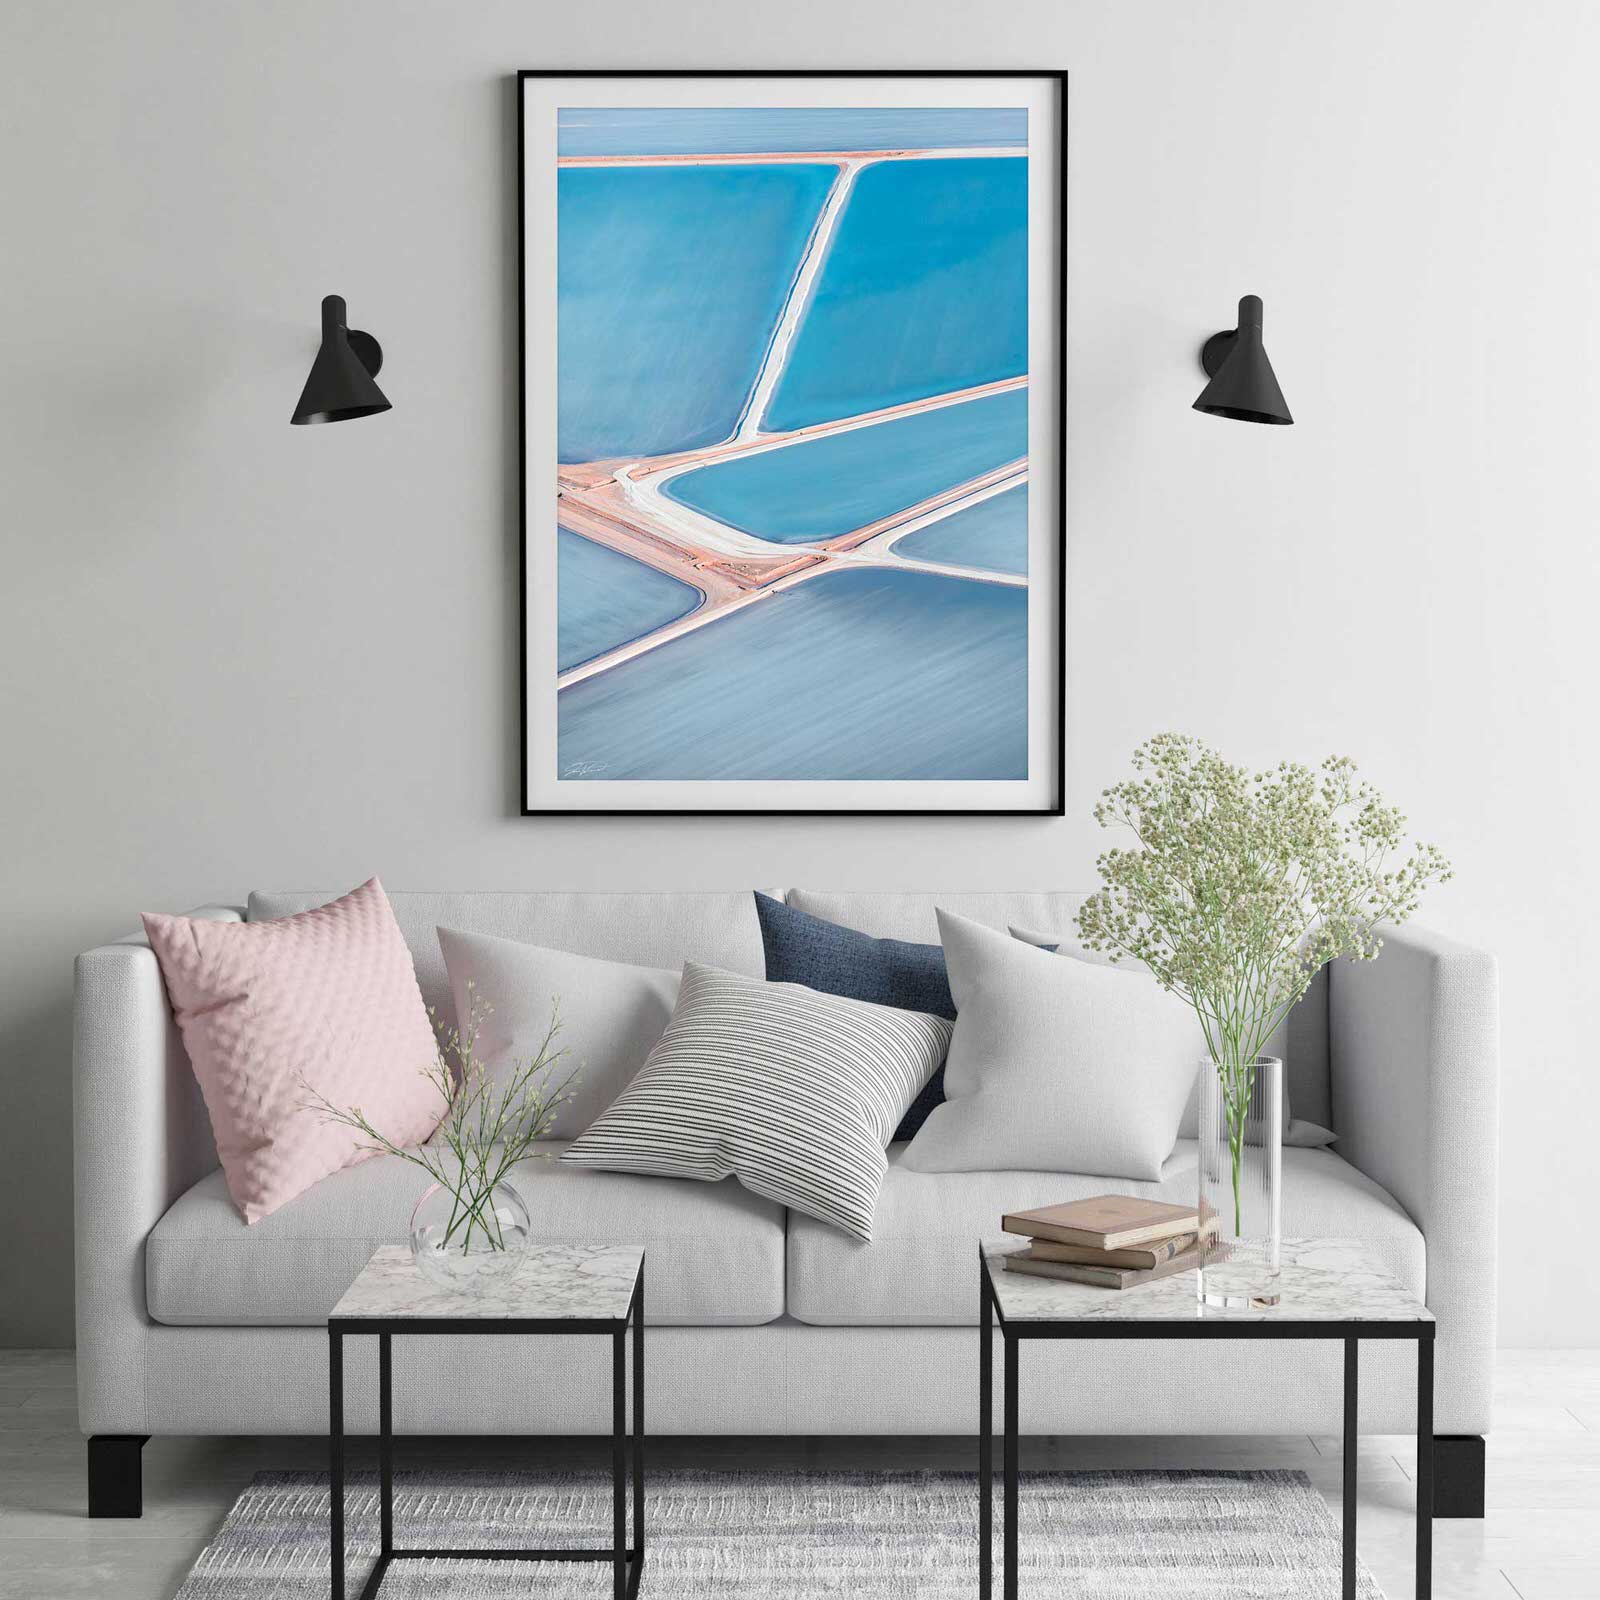 Black Framed Wall art with abstract blue aerial photography